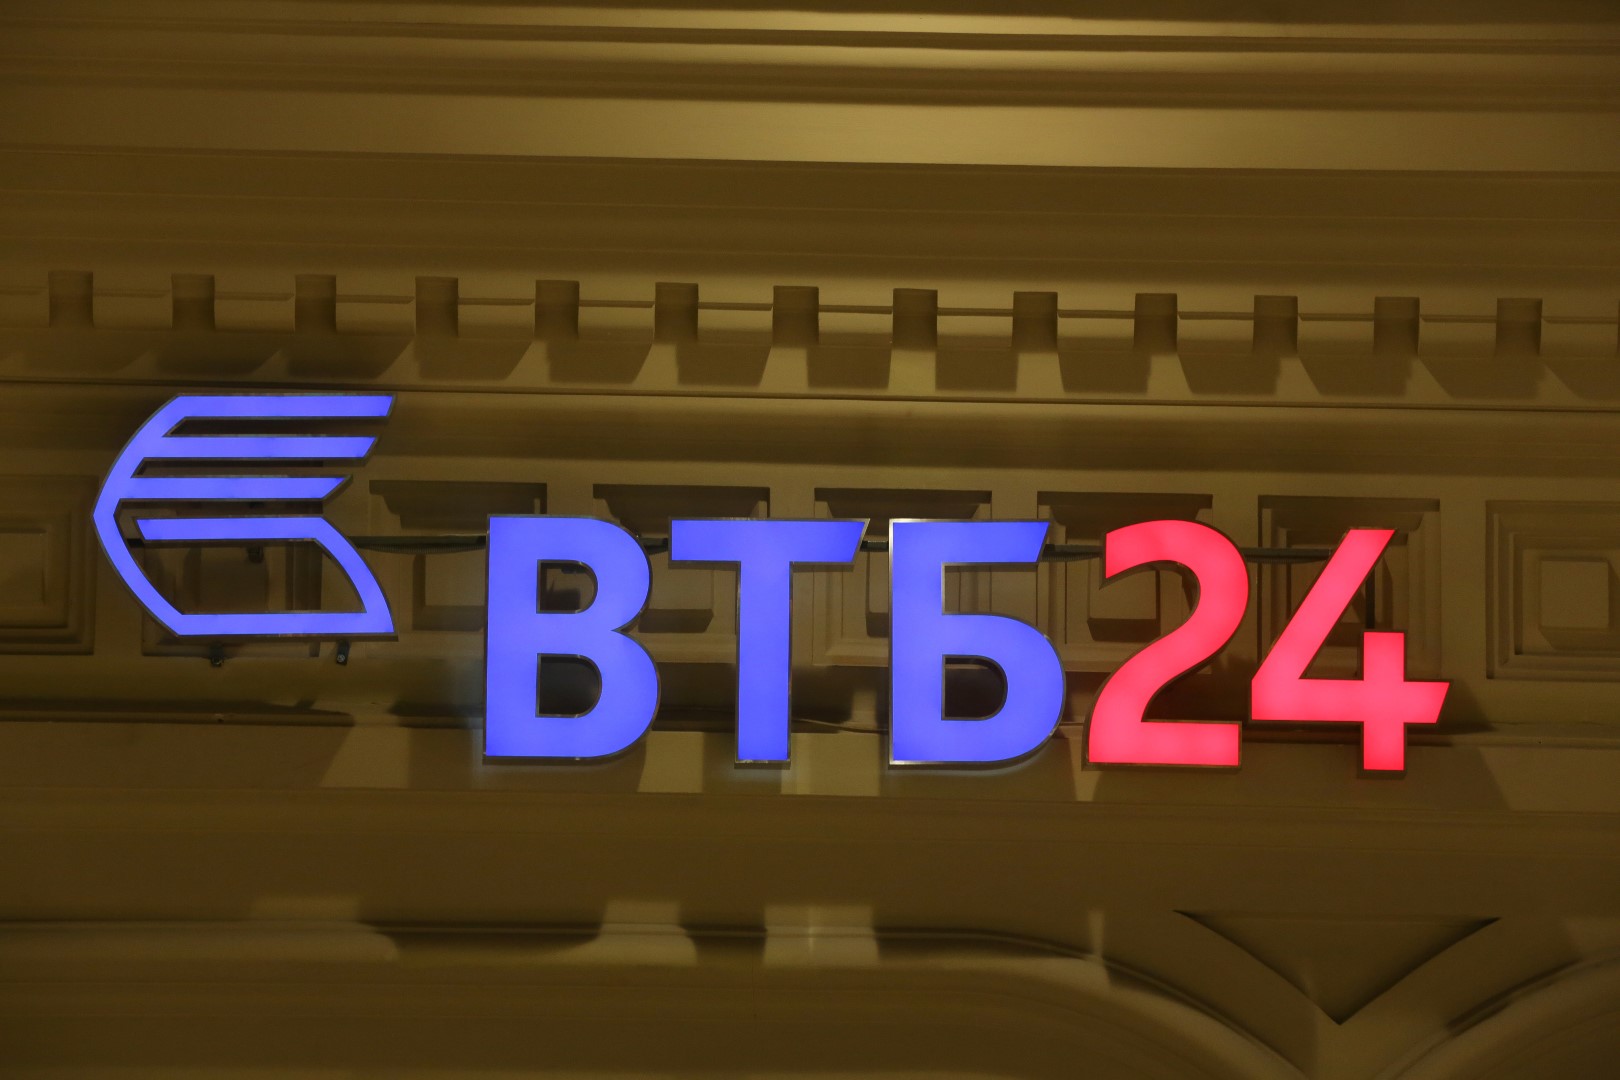 An illuminated sign for Bank VTB 24, a retail unit of state-controlled VTB Group, sits on display above an automated teller machine (ATM) outlet in Moscow, Russia, on Monday, Dec. 22, 2014. The ruble's rout, sparked by falling oil prices and sanctions imposed on businesses including OAO Sberbank, prompted Russians to begin buying luxury goods from Porsche sports cars to Tiffany rings to preserve the value of their savings. Photographer: Andrey Rudakov/Bloomberg